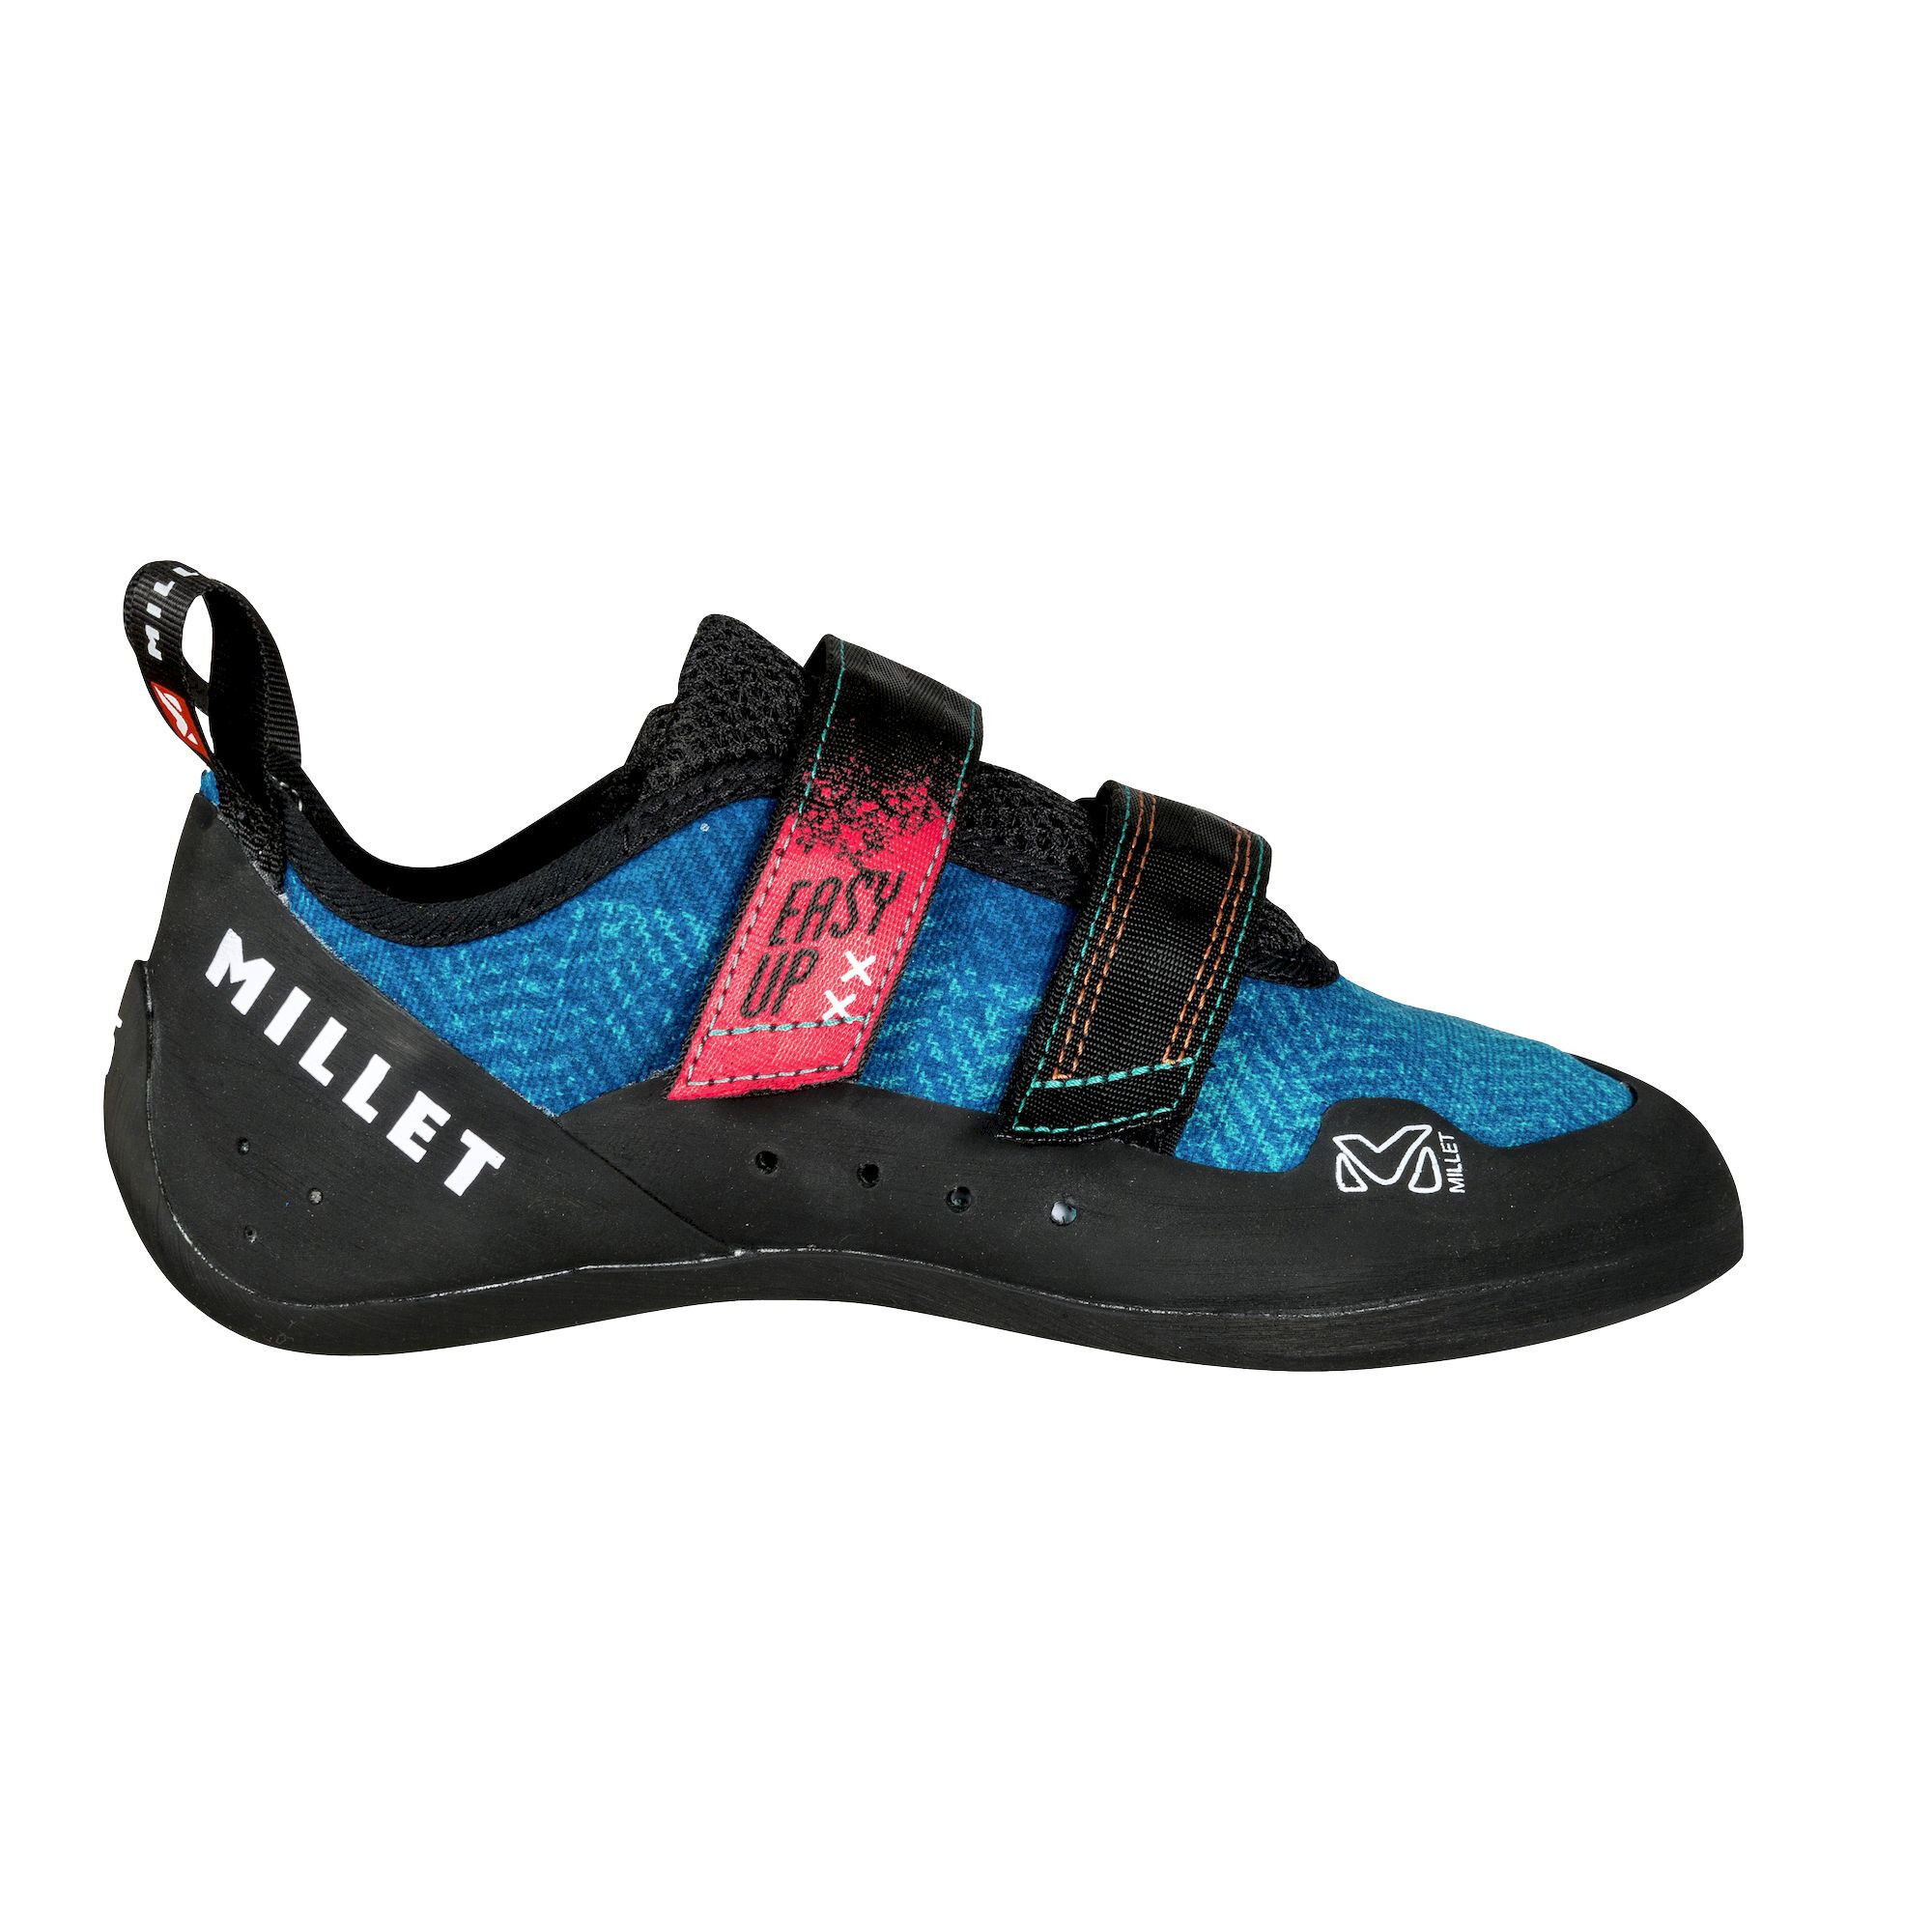 Millet - LD Easy Up - Climbing shoes - Women's